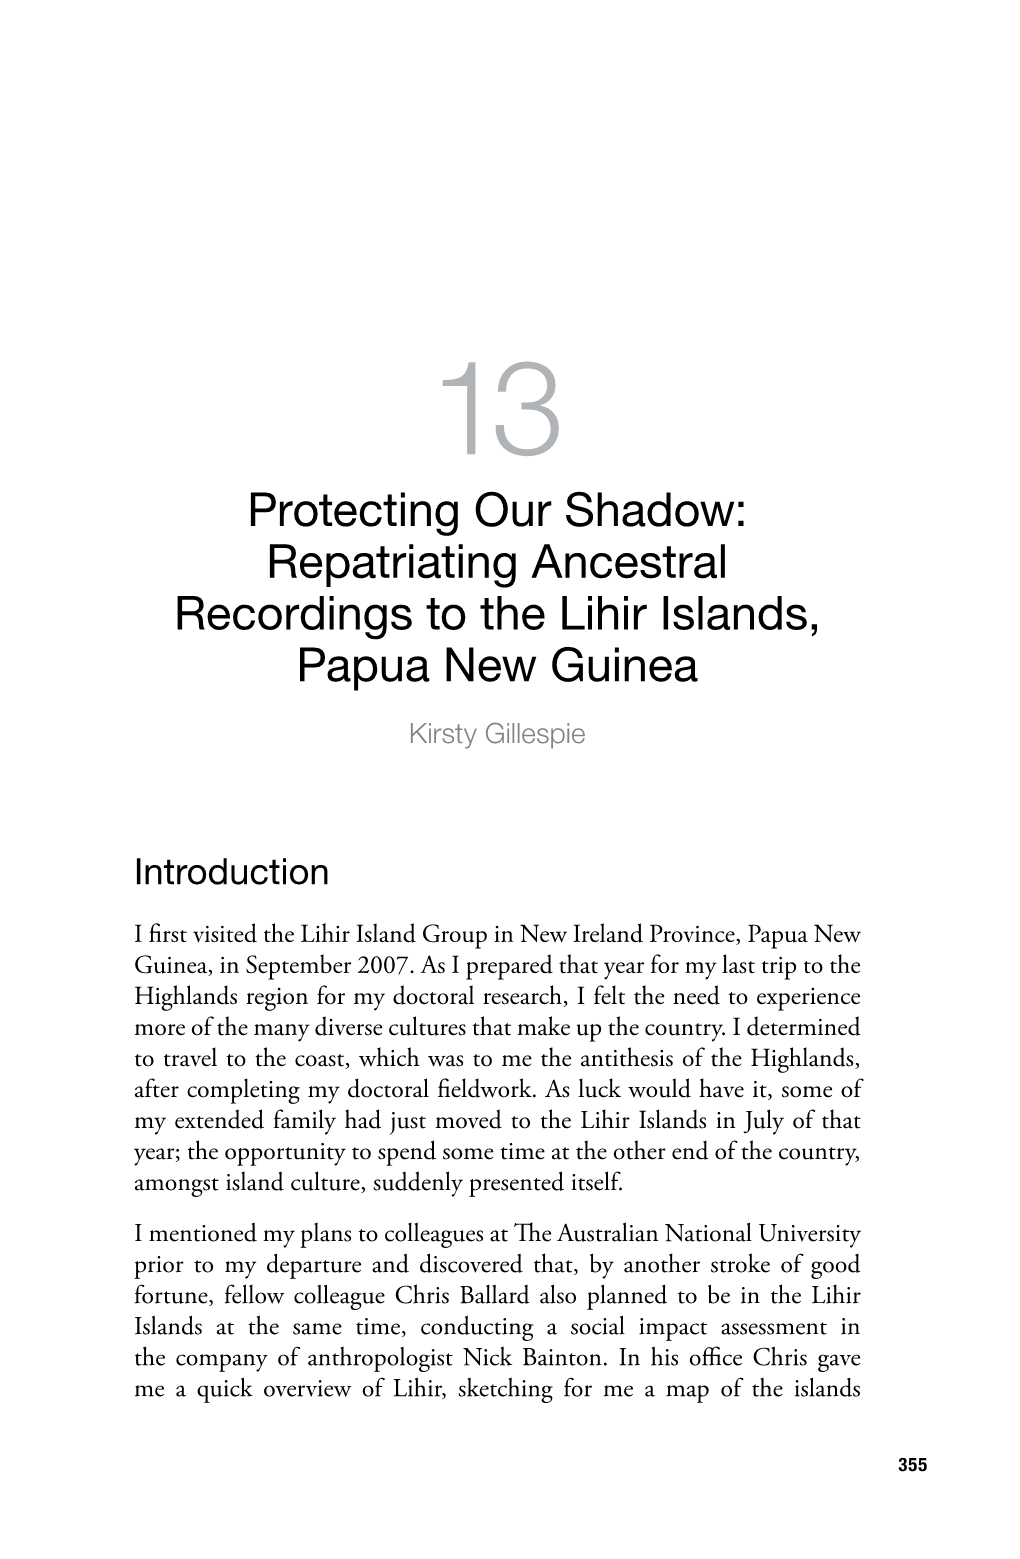 Repatriating Ancestral Recordings to the Lihir Islands, Papua New Guinea Kirsty Gillespie